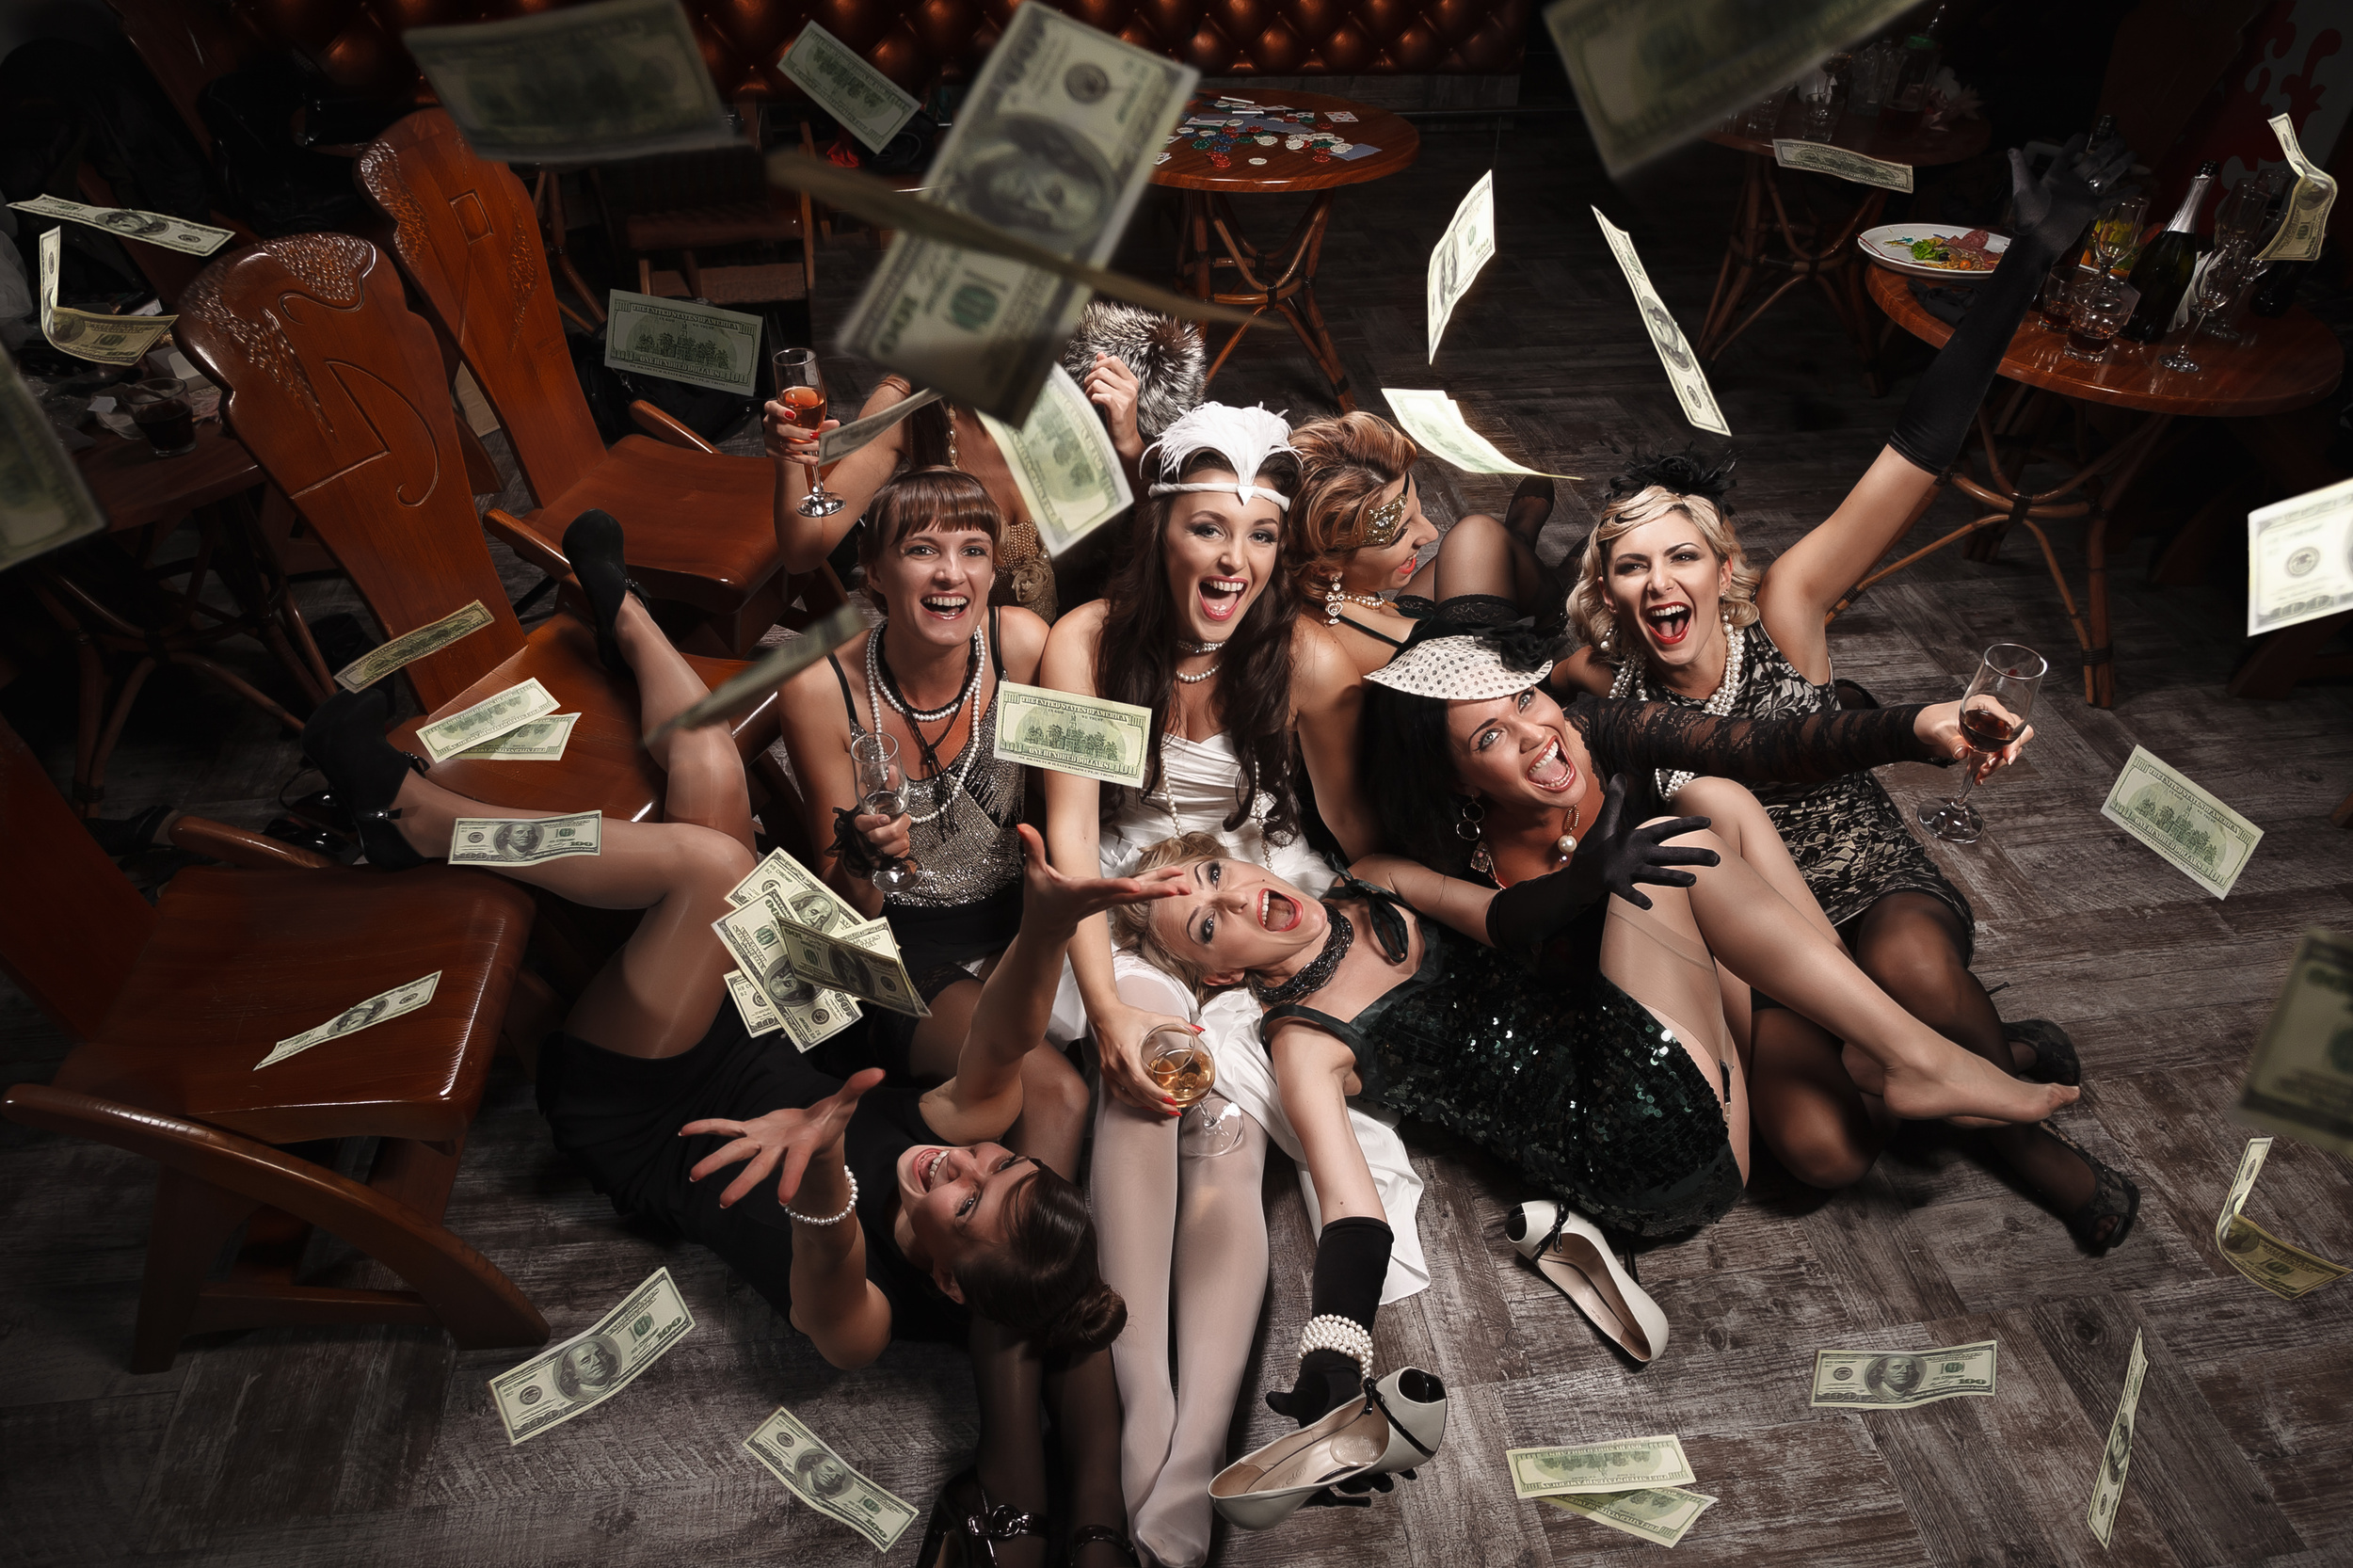 <p>Casino parties are glamorous and fun for many occasions, so why not utilize that same energy for a bachelorette party? Gamble with the girls and make plenty of puns about getting lucky. It's also the perfect excuse to place bets on who's going to be the wildest of the night. </p><p>You may also like: <a href='https://www.yardbarker.com/lifestyle/articles/20_holidays_around_the_world_americans_dont_celebrate_032024/s1__40065105'>20 holidays around the world Americans don't celebrate</a></p>